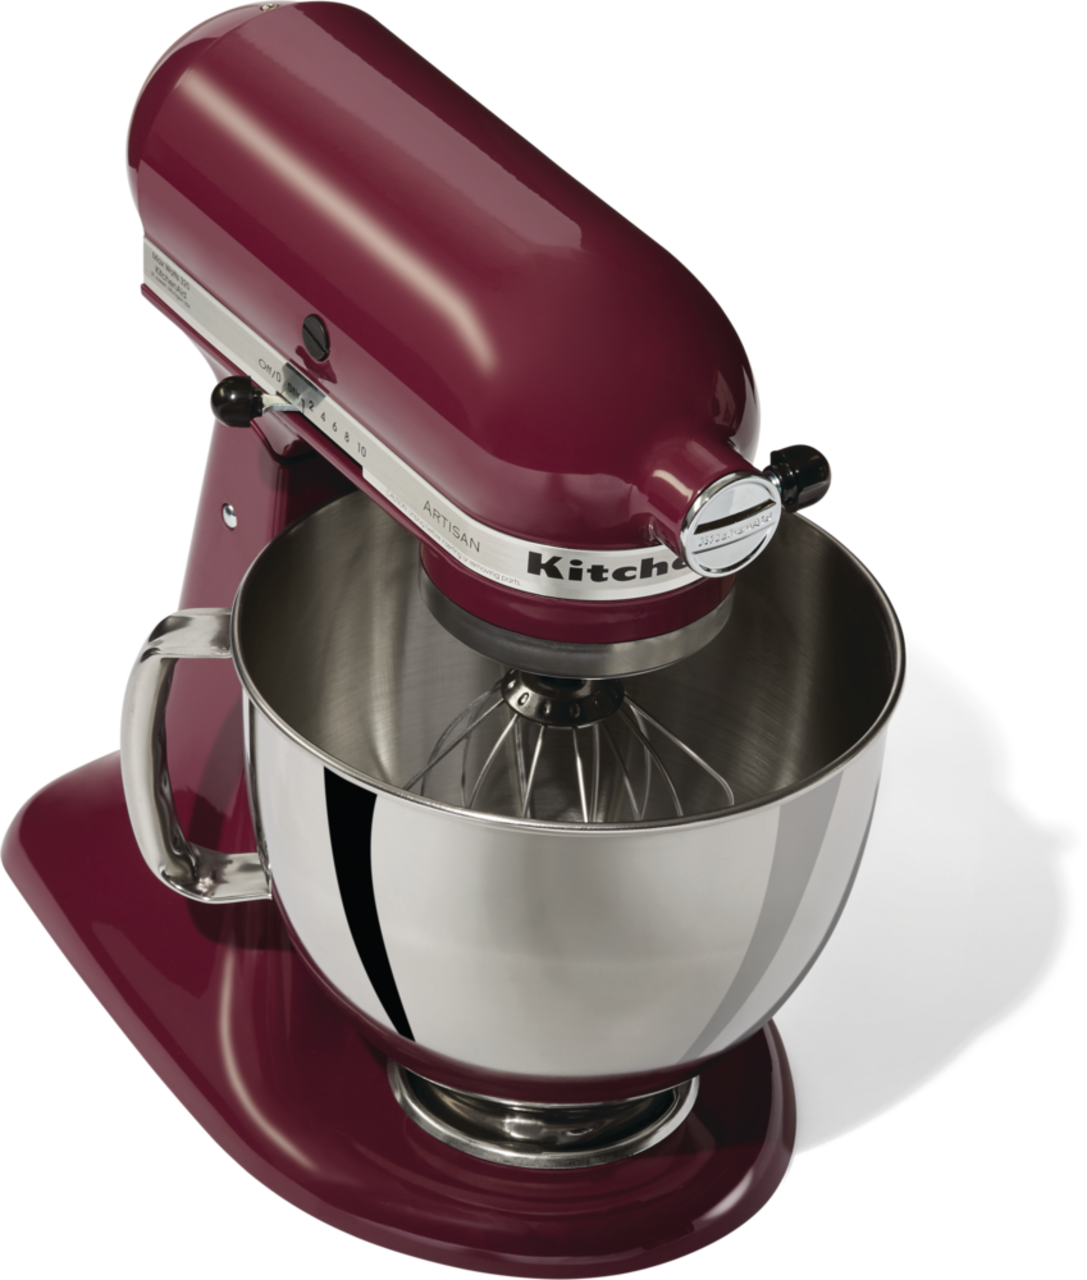 https://media-www.canadiantire.ca/product/living/kitchen/kitchen-appliances/0431423/artisan-stand-mixer-boysenberry-7d4f04d1-049d-42f3-8298-e299d90c6f6e.png?imdensity=1&imwidth=1244&impolicy=mZoom